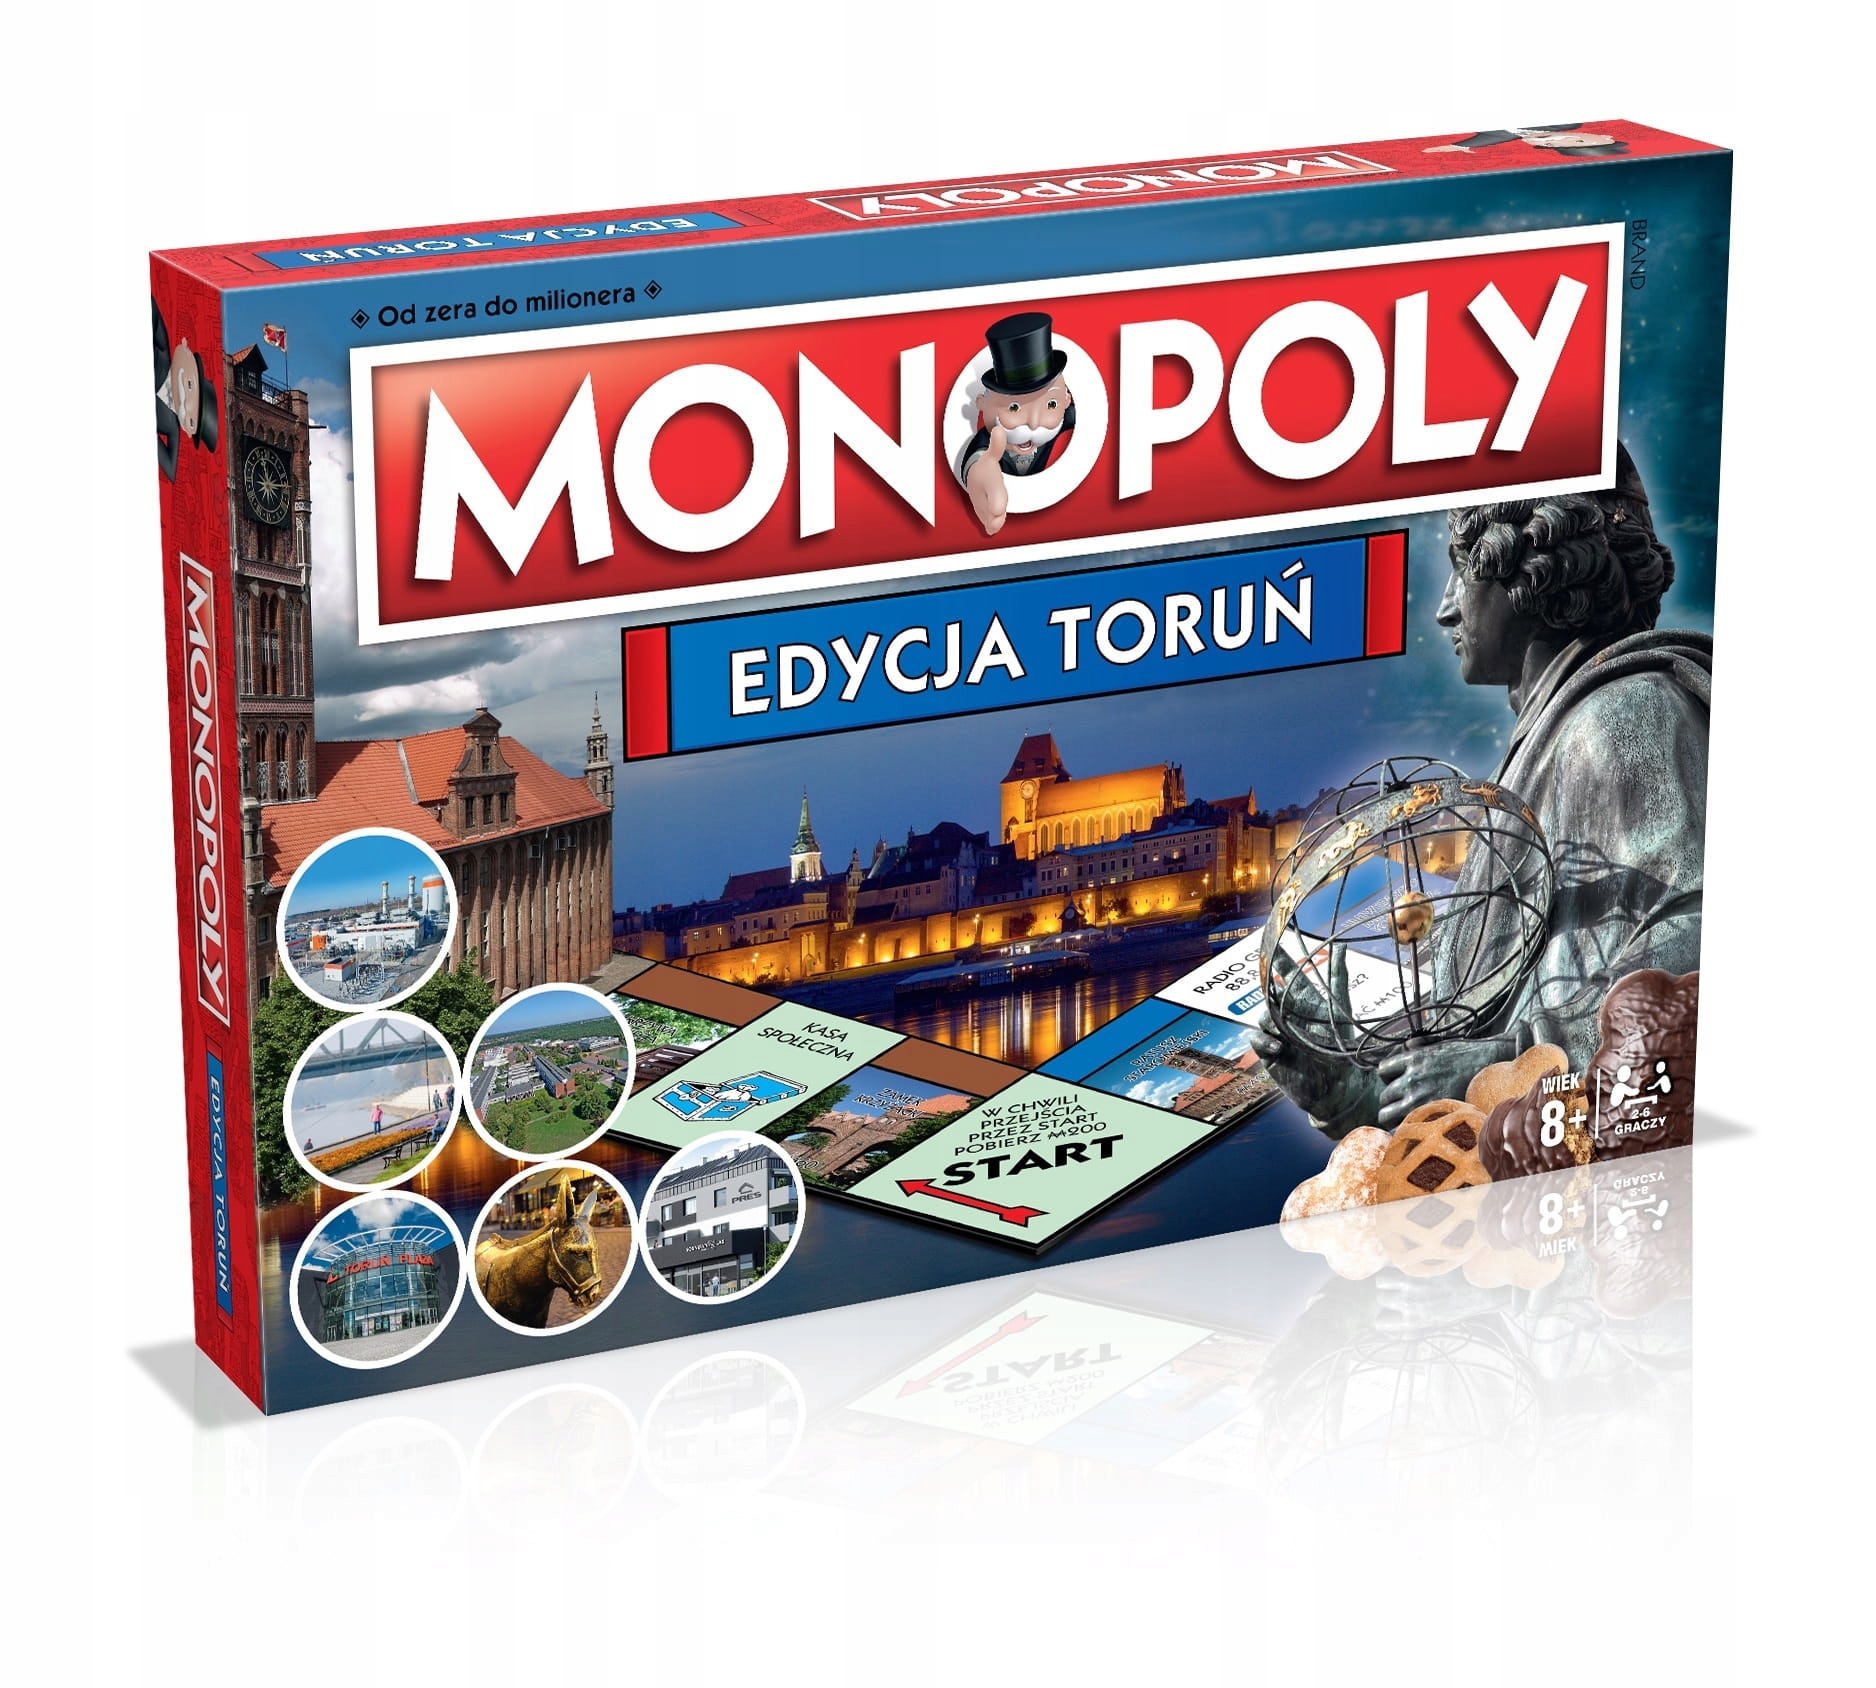 Https monopoly. Монополия. Монополия игра. Монополия коробка. Монополия игра коробка.